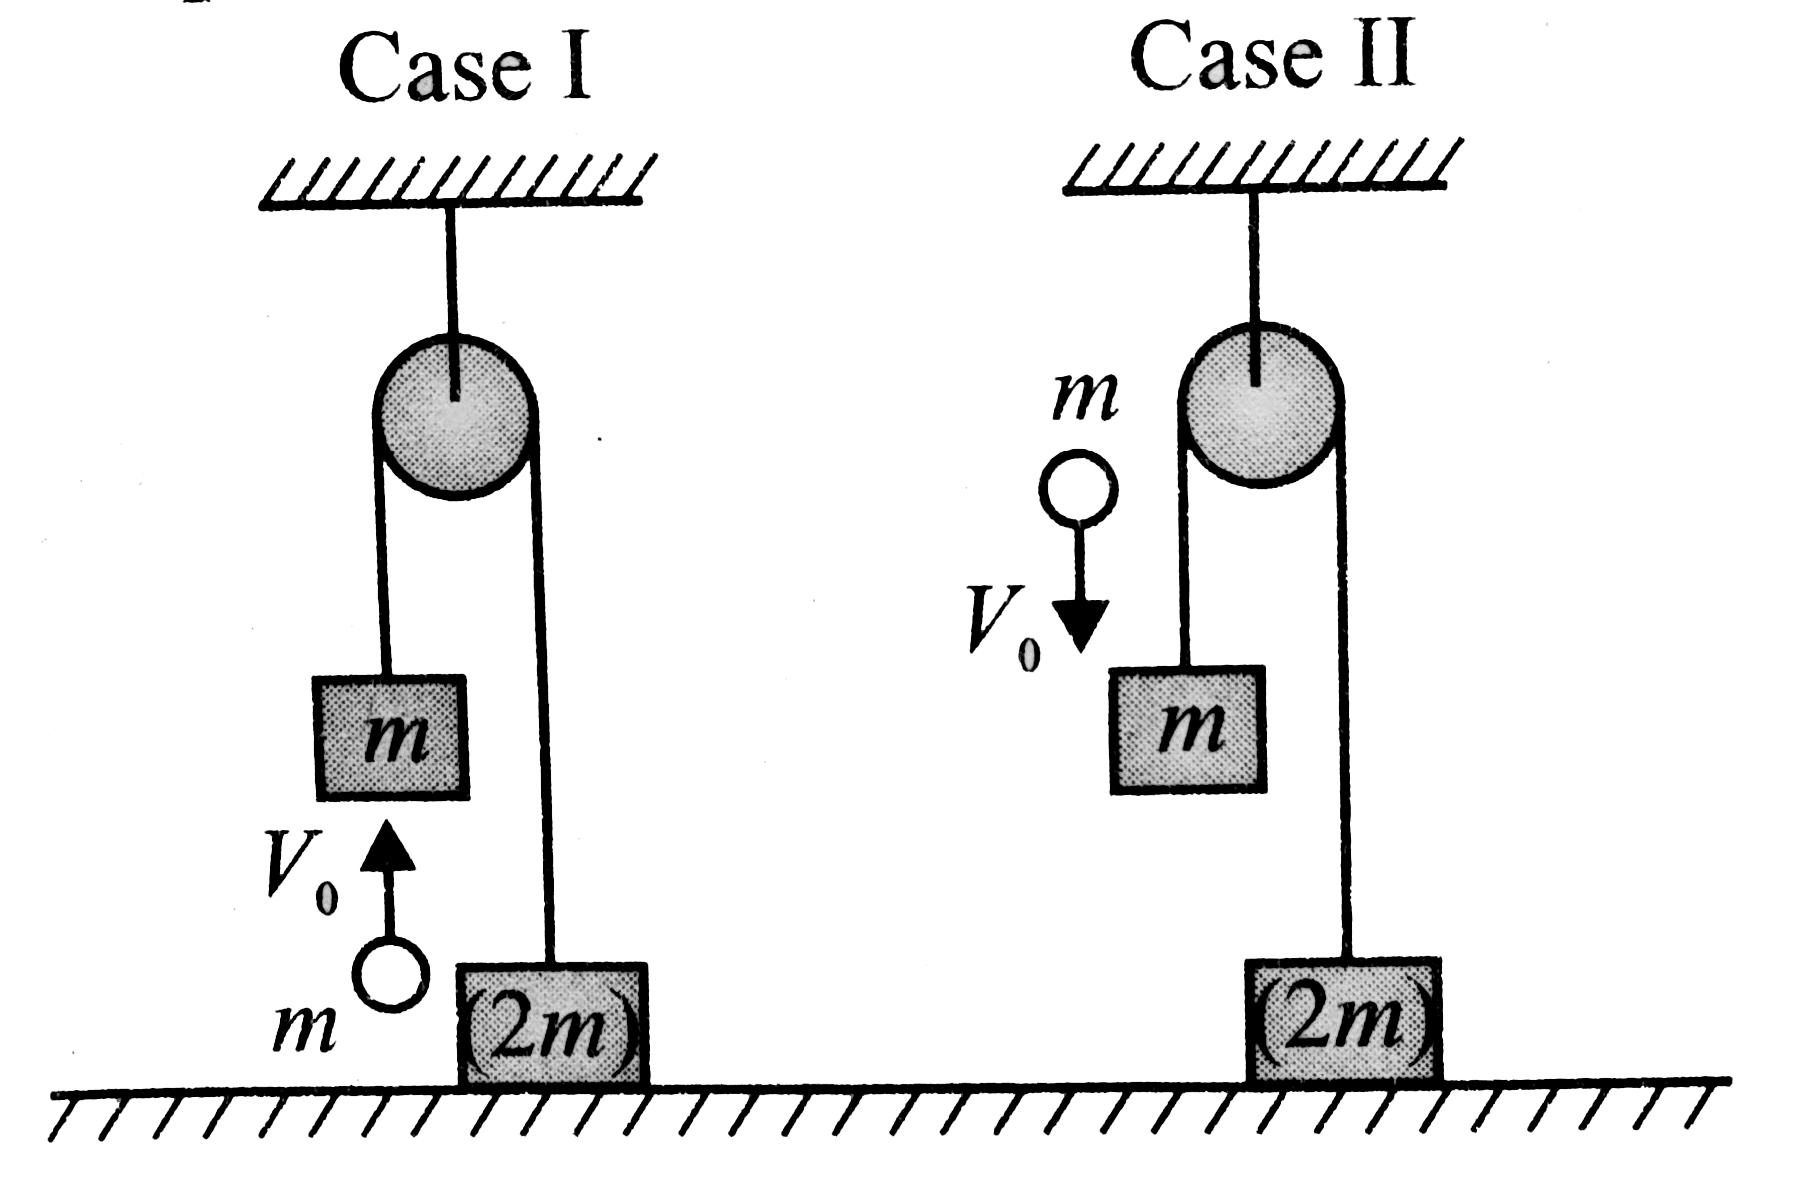 Two masses 2m and m are connected by an inextensible light string. The string is passing over a light frictionless pulley. The mass 2m is resting on a surface and mass in is hanging in air as shown in Fig.  A particle of mass in strikes the mass in from below in case (I) with a velocity v(0) and in case (II) strikes mass in with a velocity v(0) from top and sticks to it.